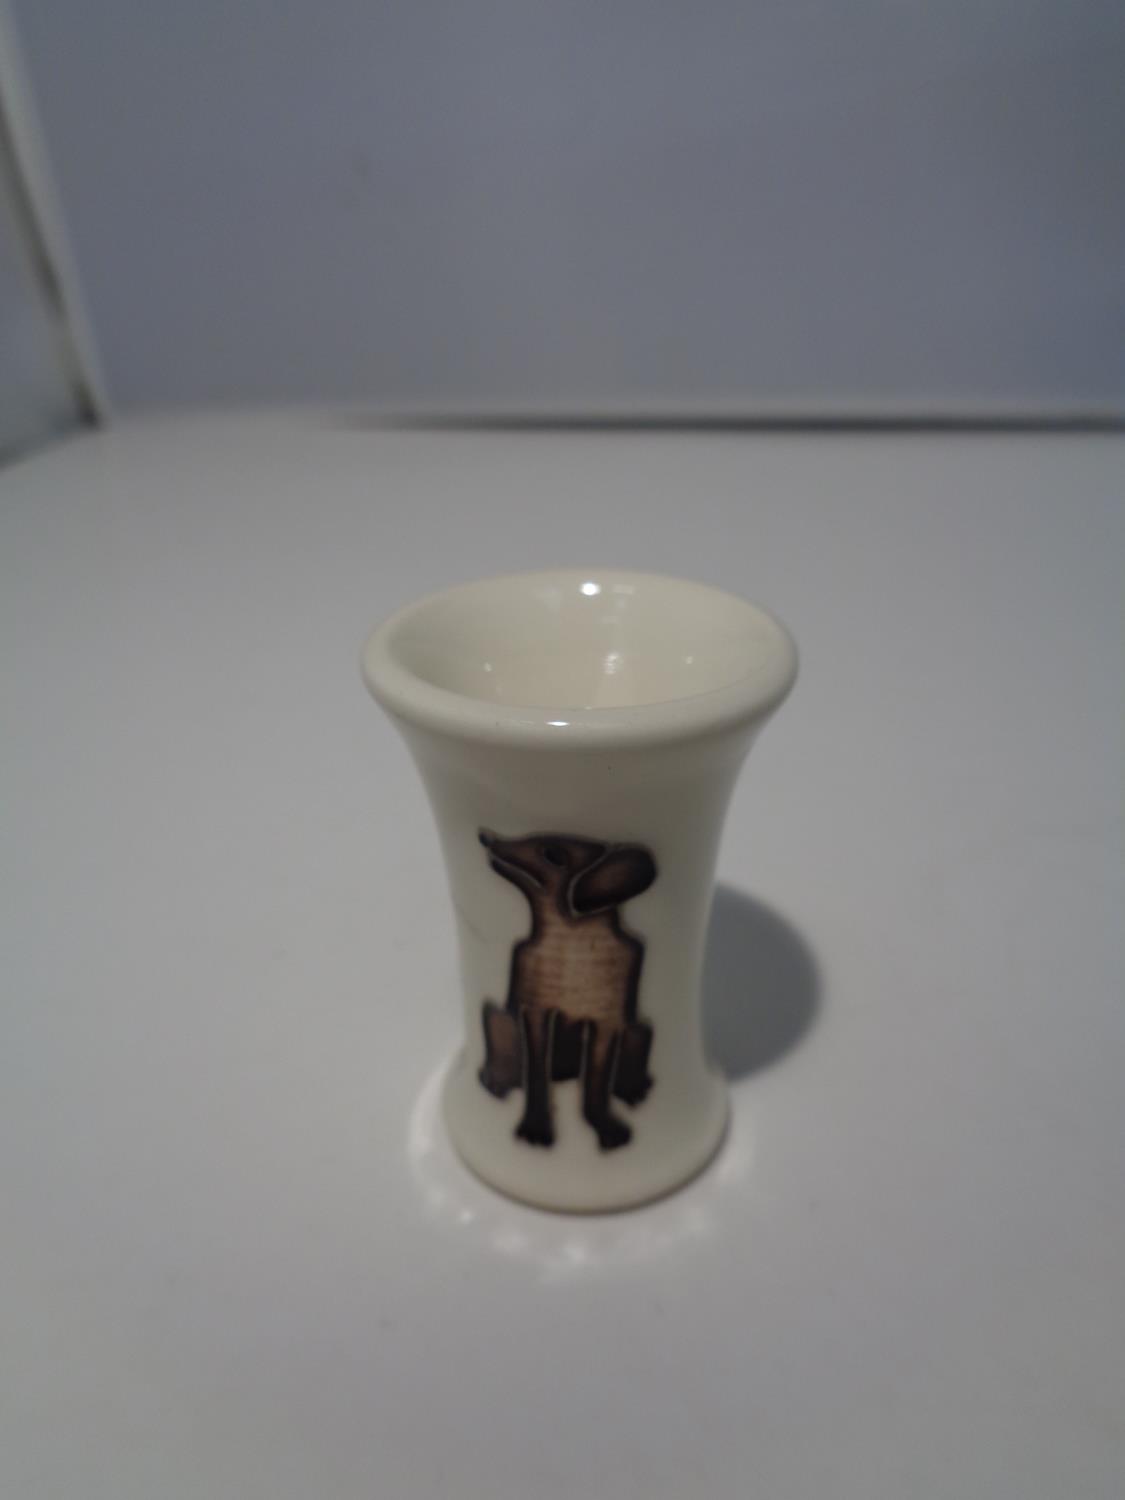 A MOORCROFT CHOCOLATE LABRADOR VASE 2 INCHES TALL - Image 8 of 8